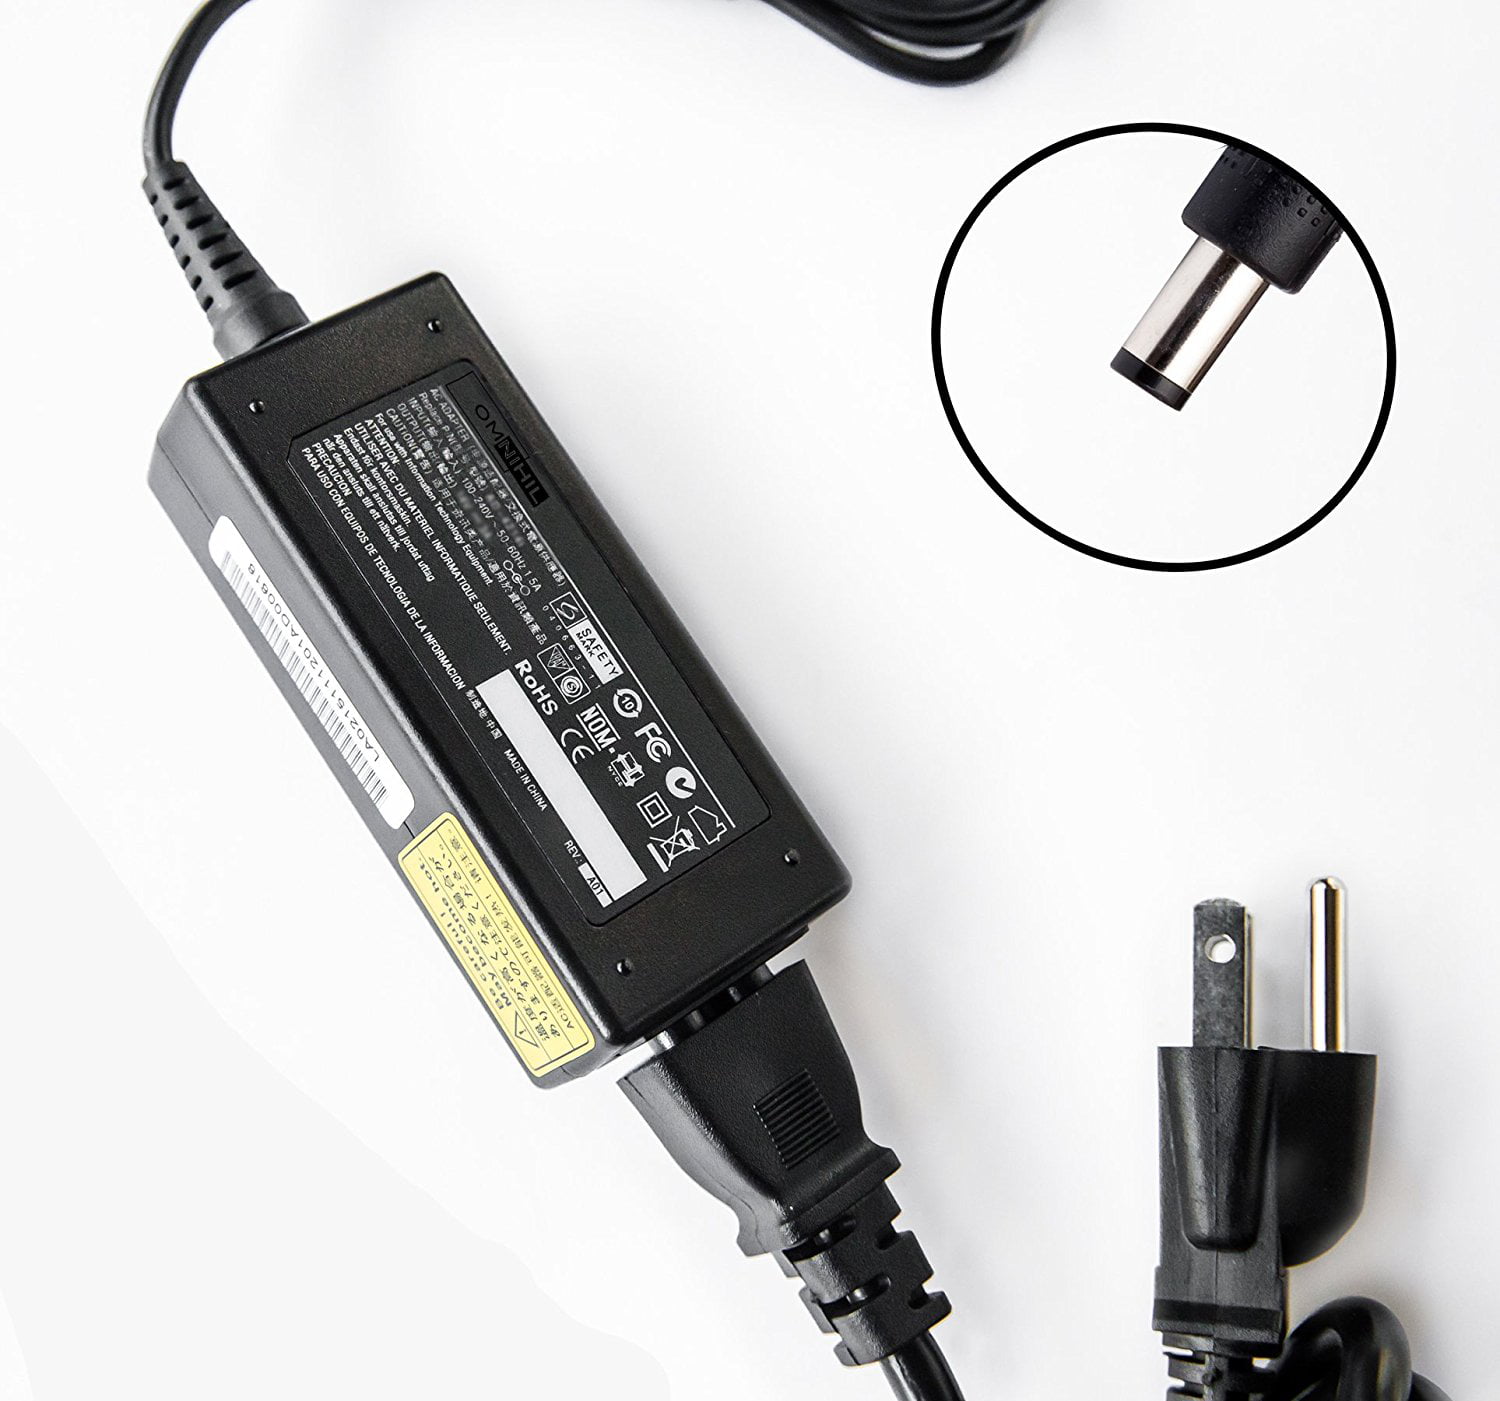 Power Adapter Charger Cable For ILIFE V3 V5 A4 A4S Sweeping Robot Vacuum Cleaner 